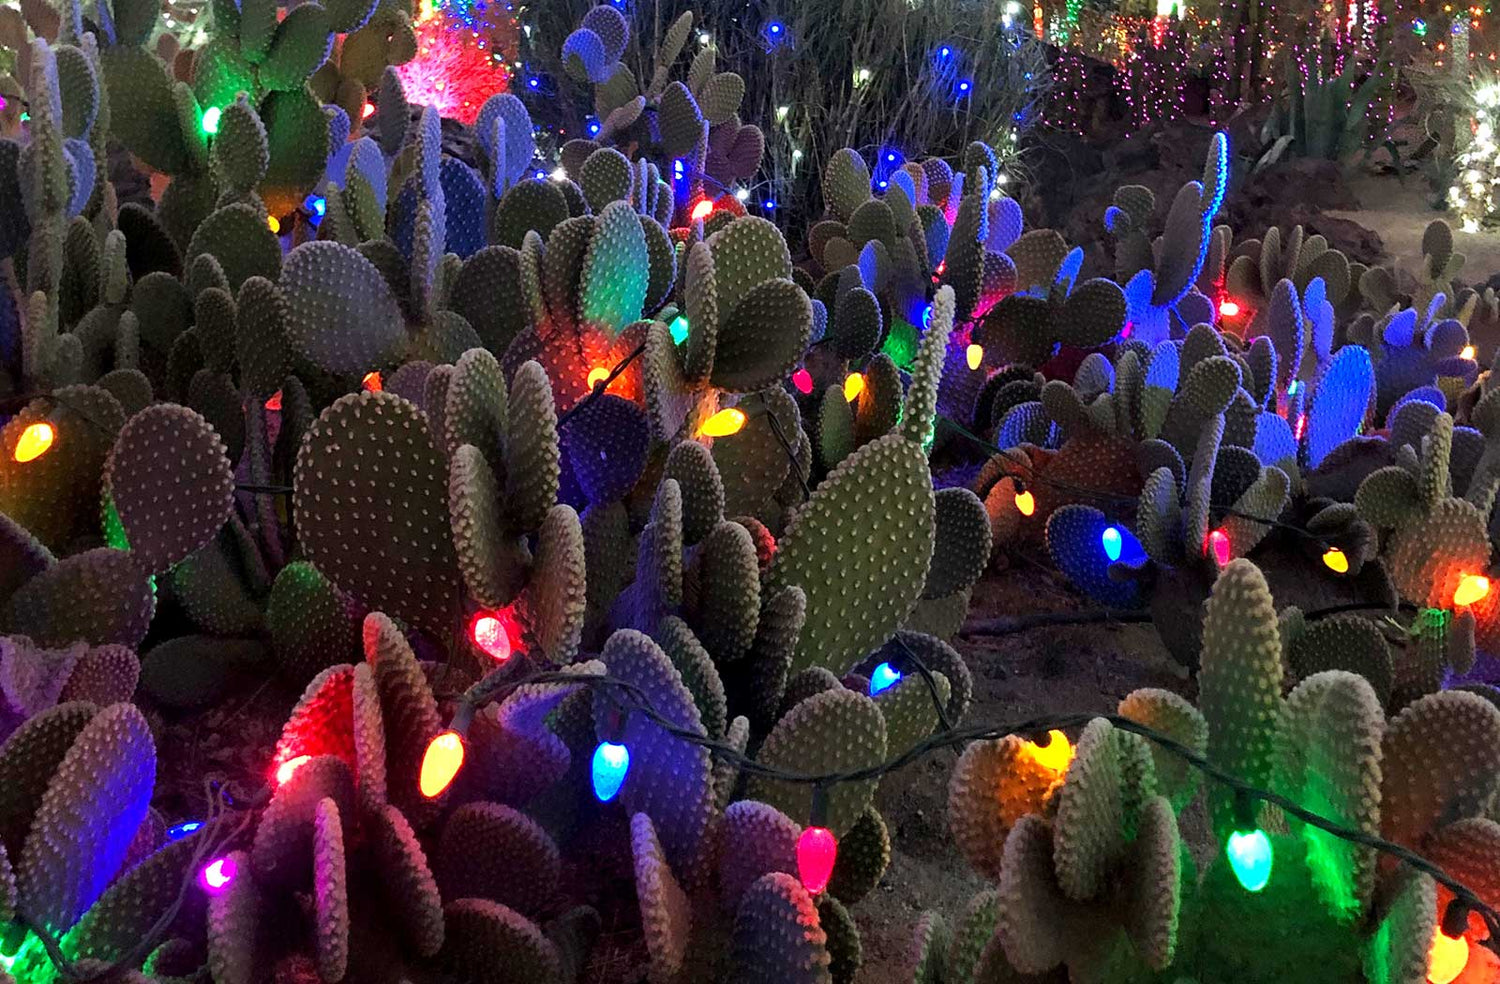 Cacti decorated with Christmas Lights